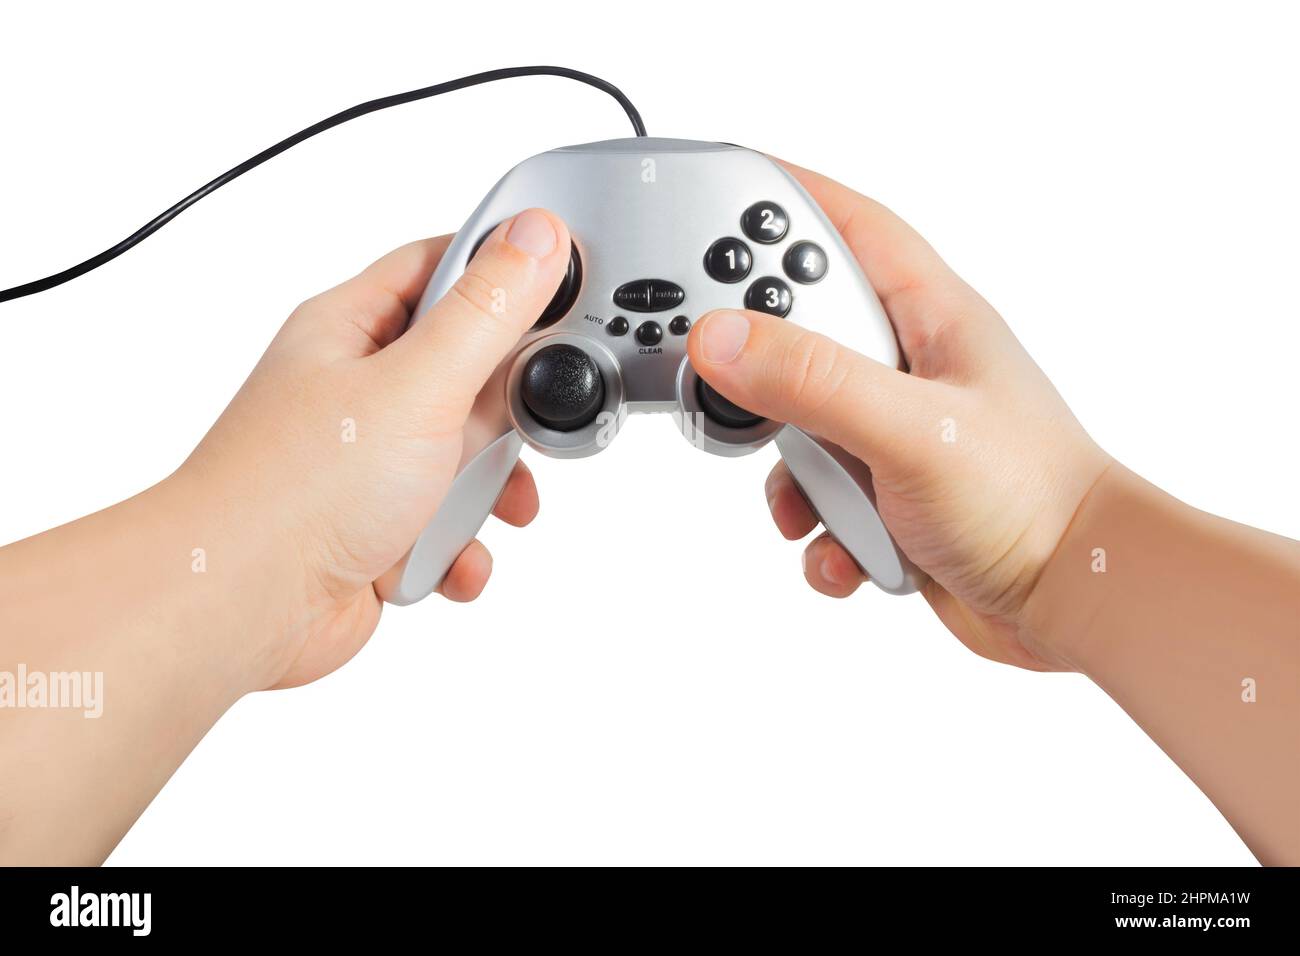 Isolated photo of first person view male hands holding silver colored and wired modern game pad controller on white background. Stock Photo